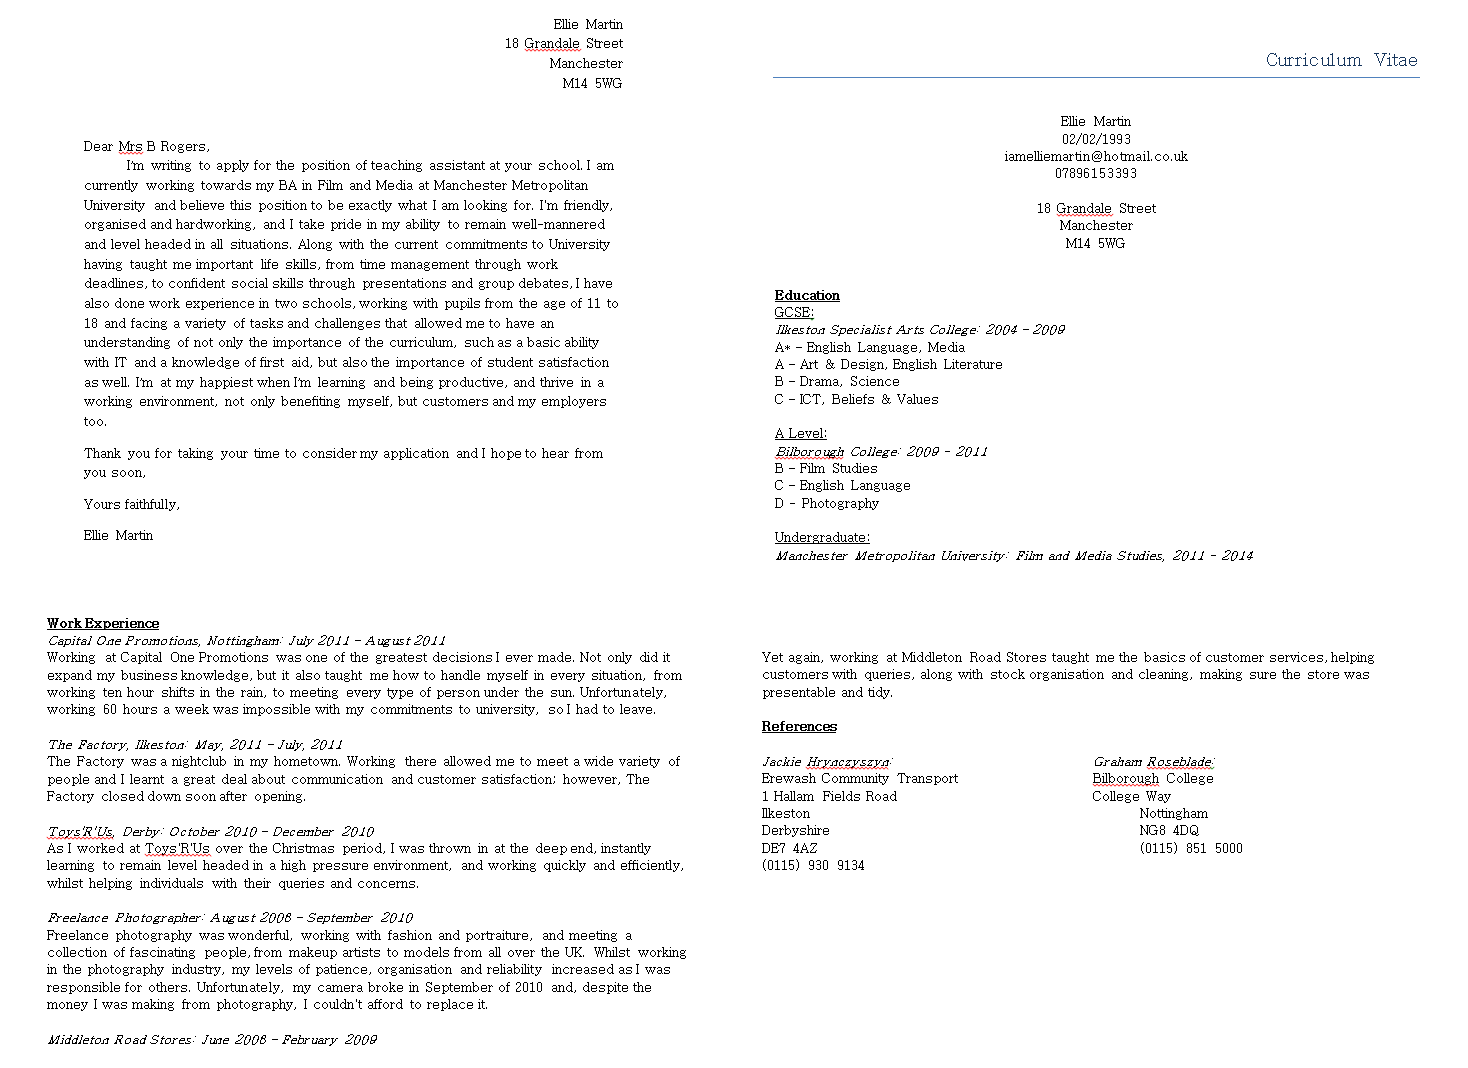 job application letter through email